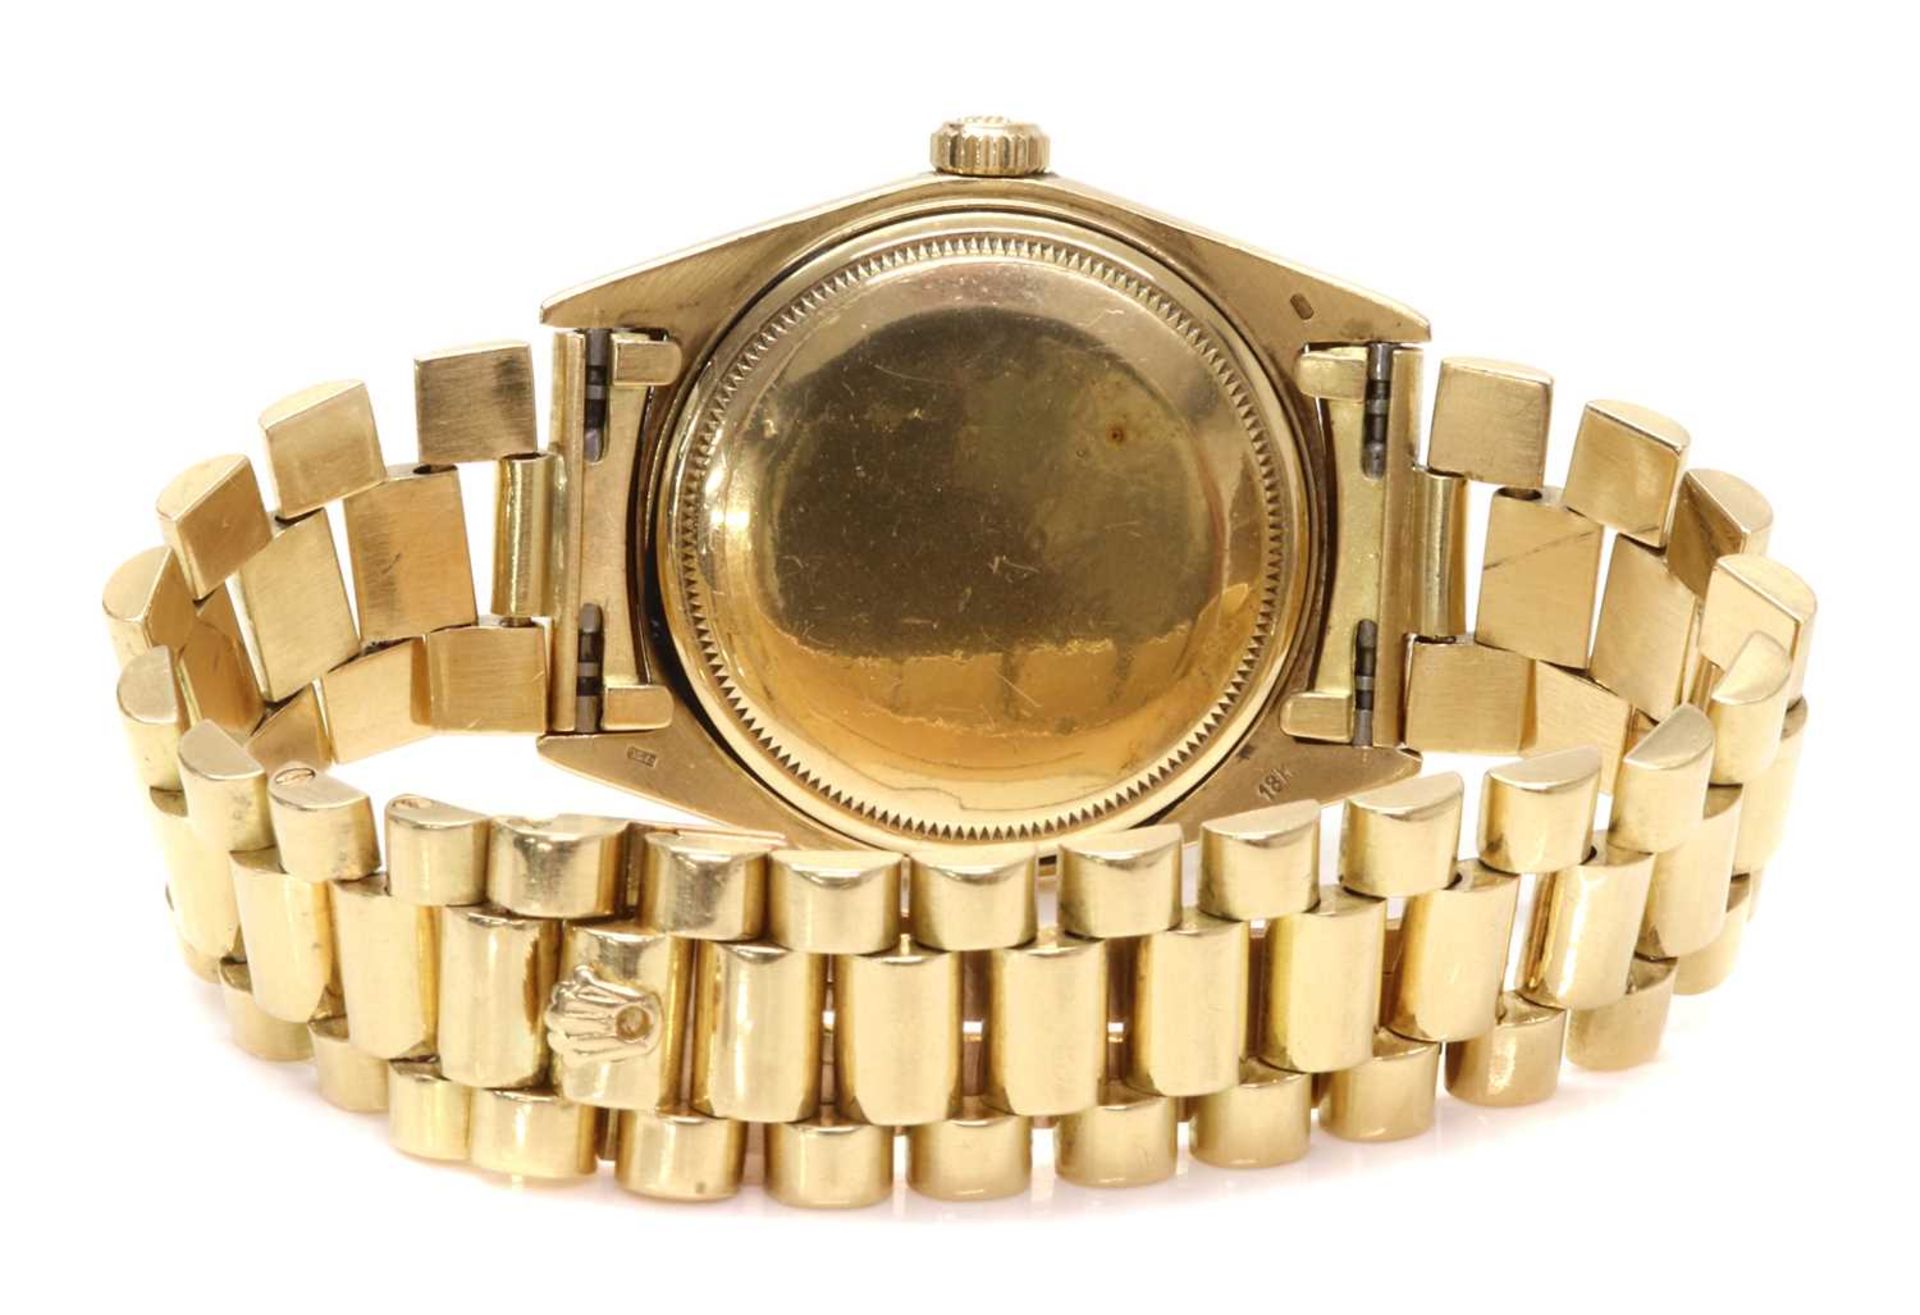 A gentlemen's 18ct gold Rolex 'Oyster Perpetual' automatic day date bracelet watch 1803, c.1973, - Image 2 of 3